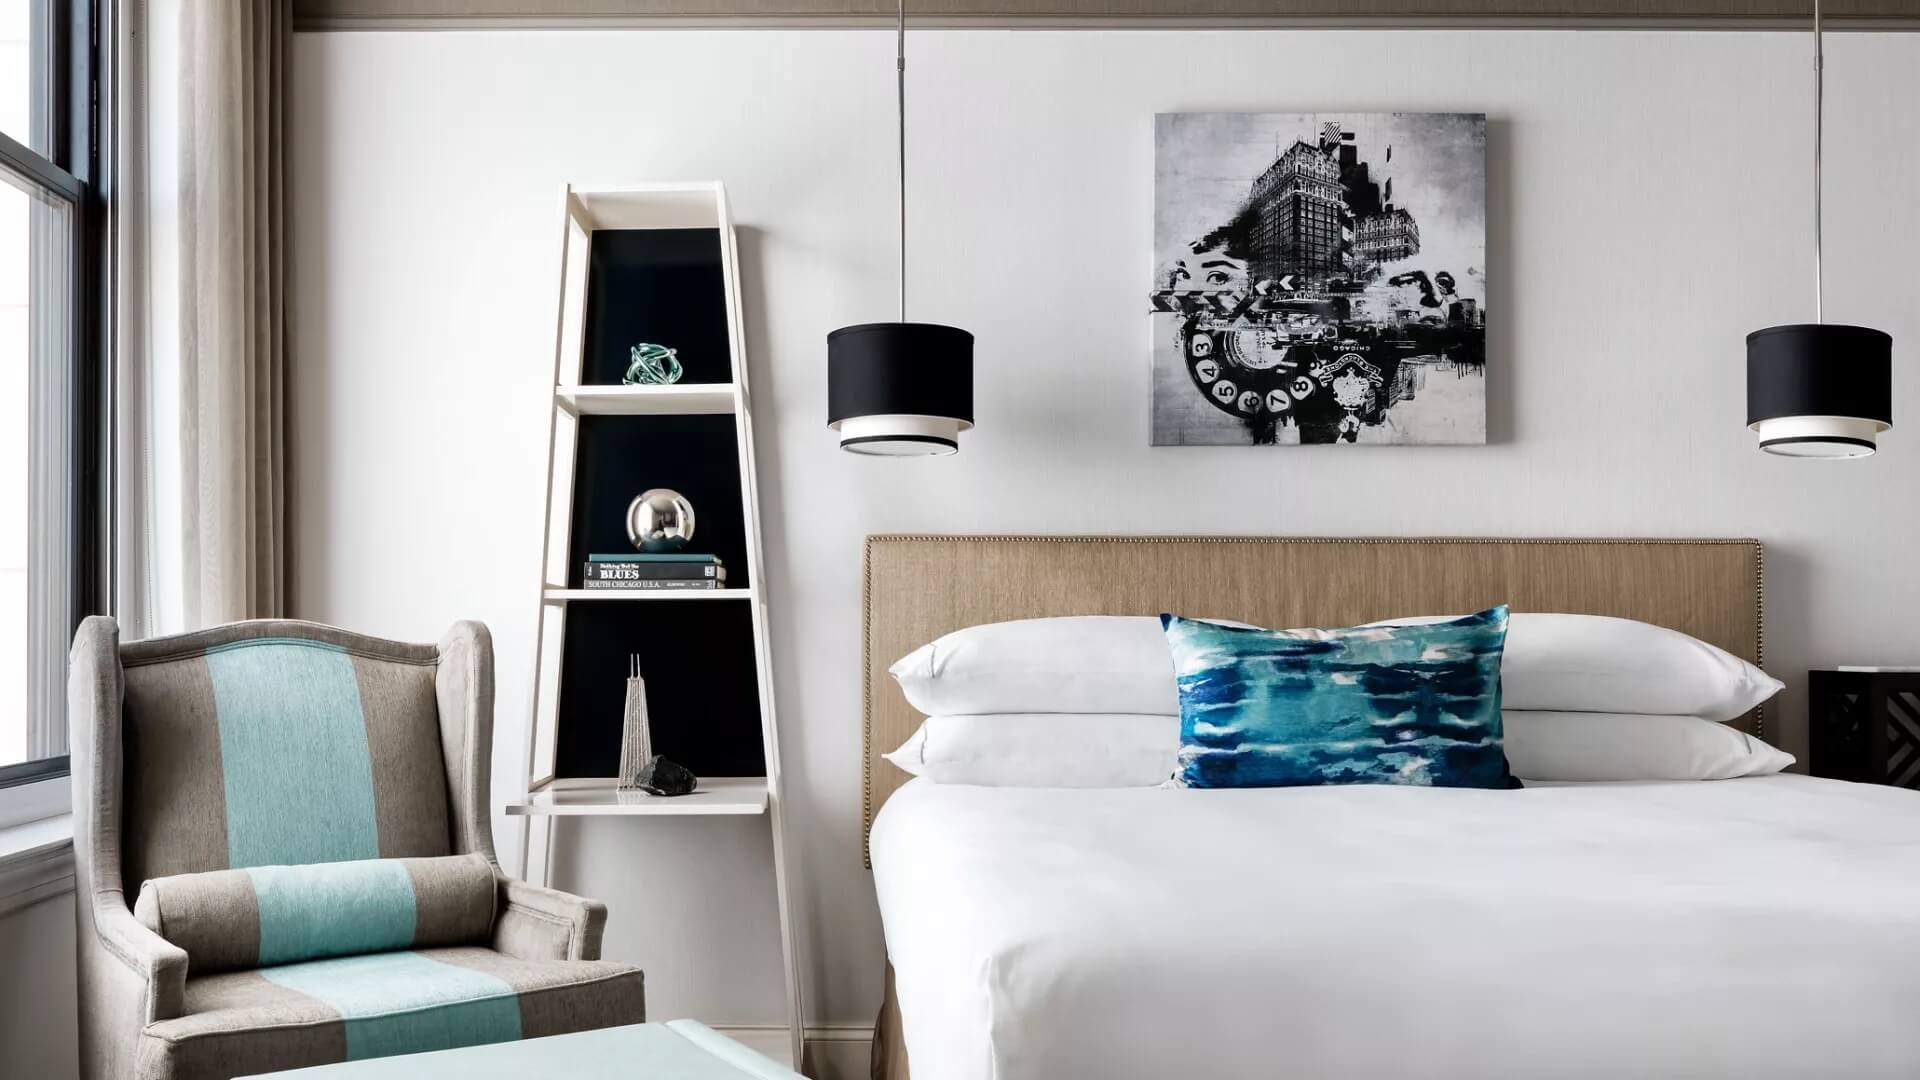 The Blackstone, Autograph Collection Guest Room